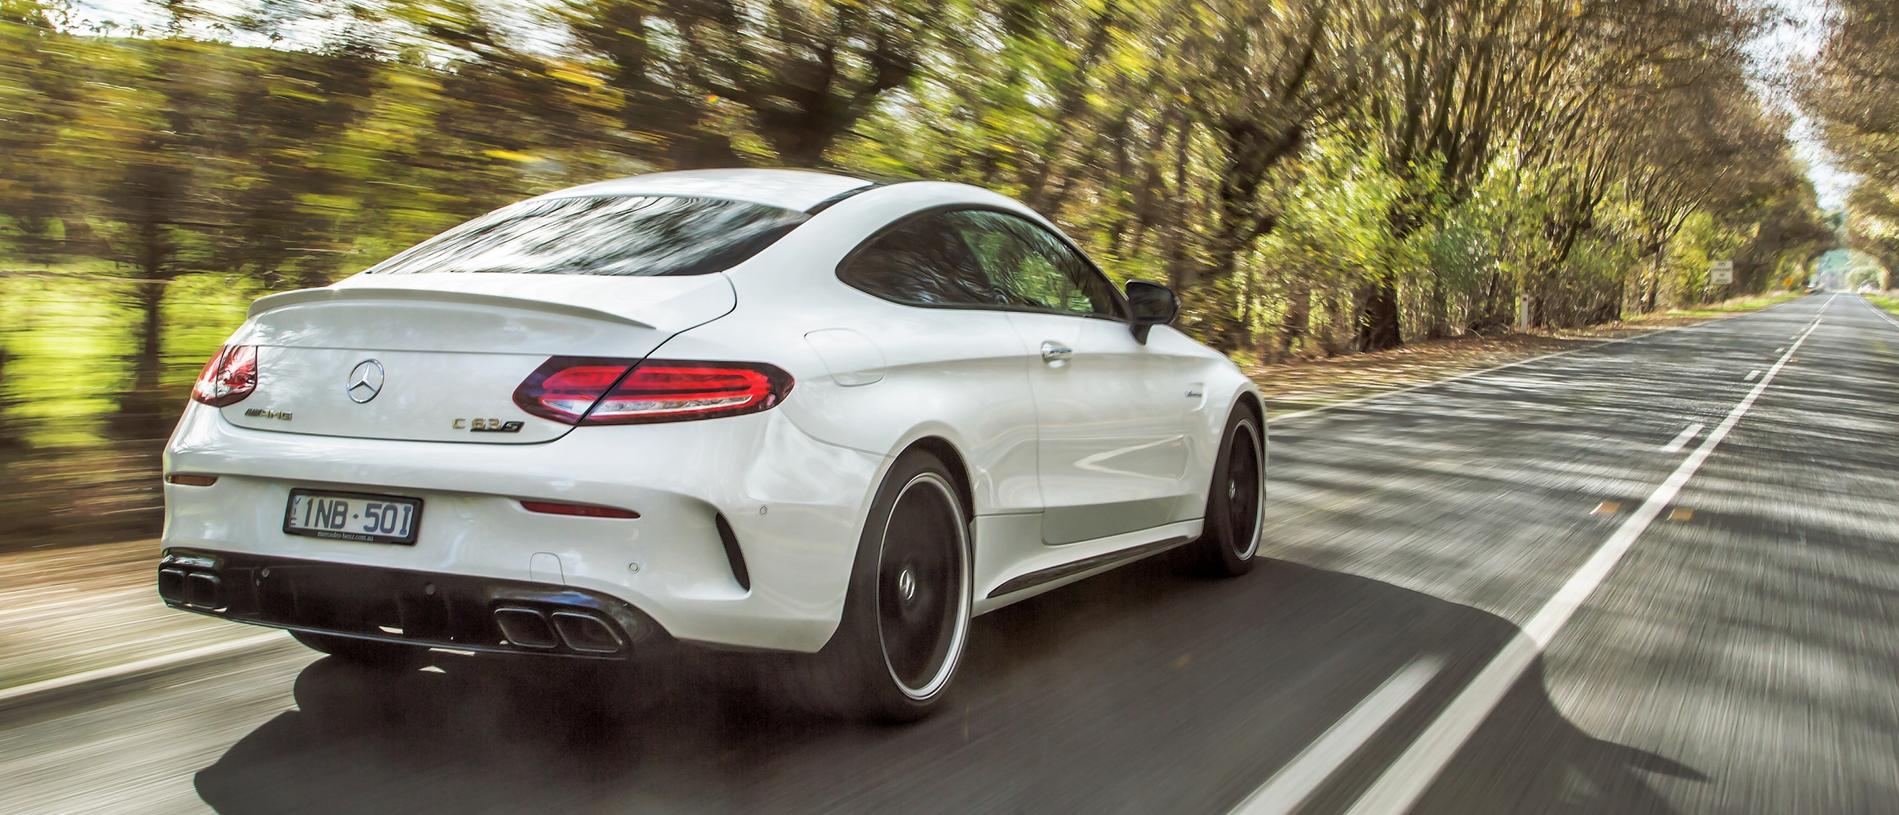 Road and track: AMG makes it well-behaved in traffic — and wild on the circuit